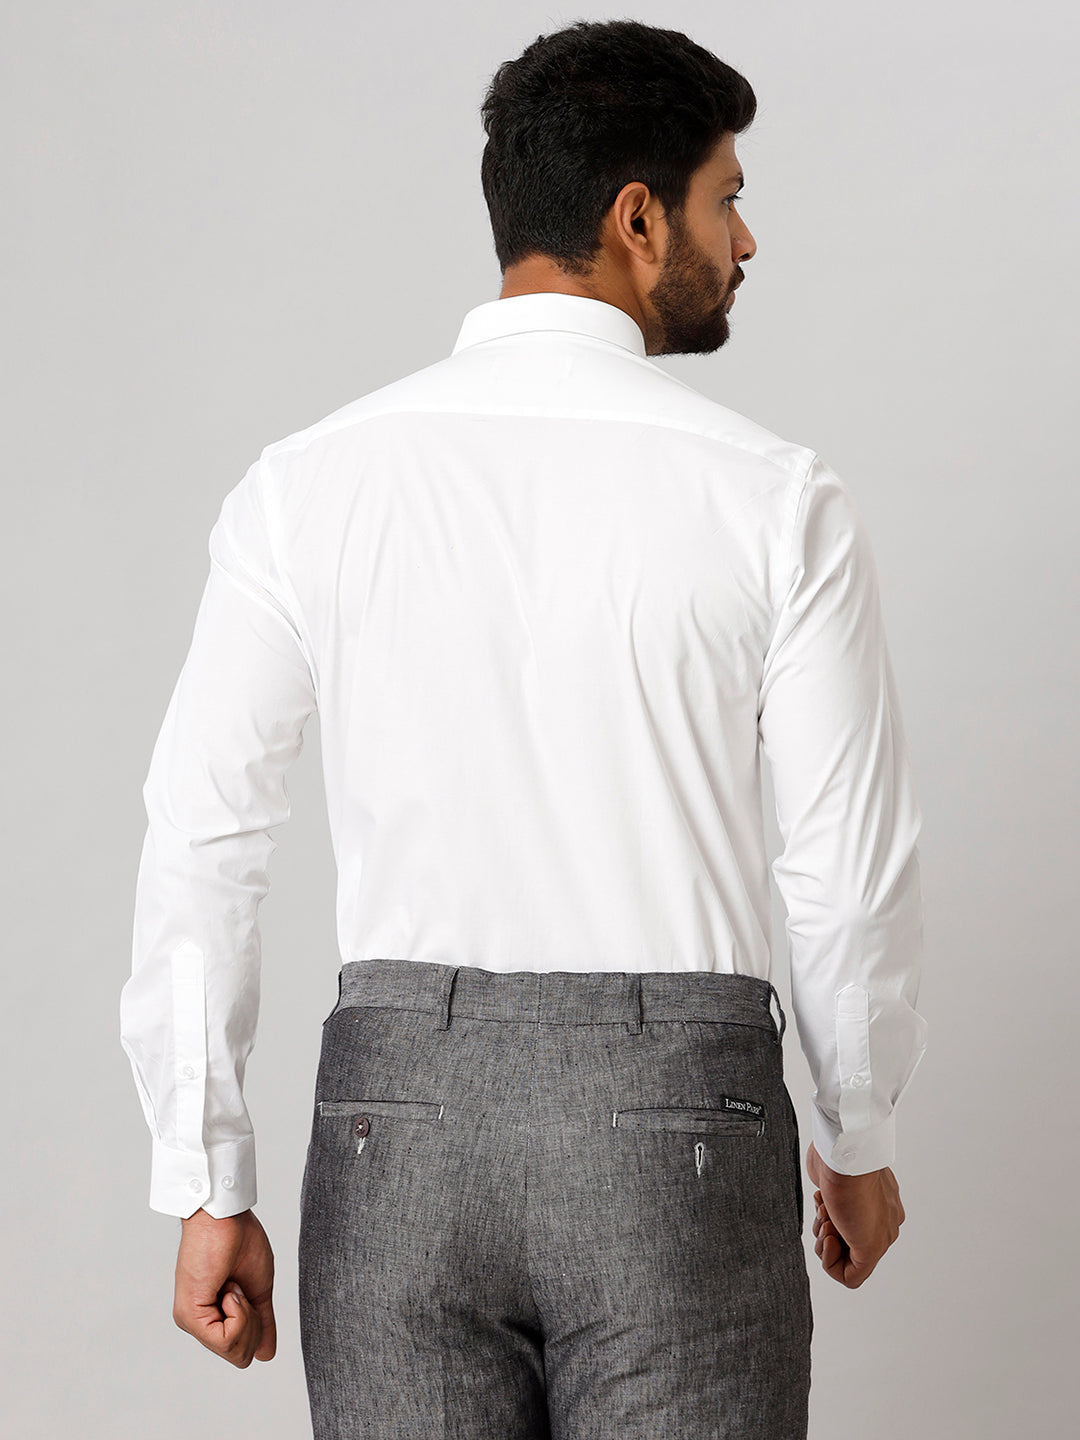 Mens Cotton Smart Fit White Full Sleeves Shirt Trendy -Back view